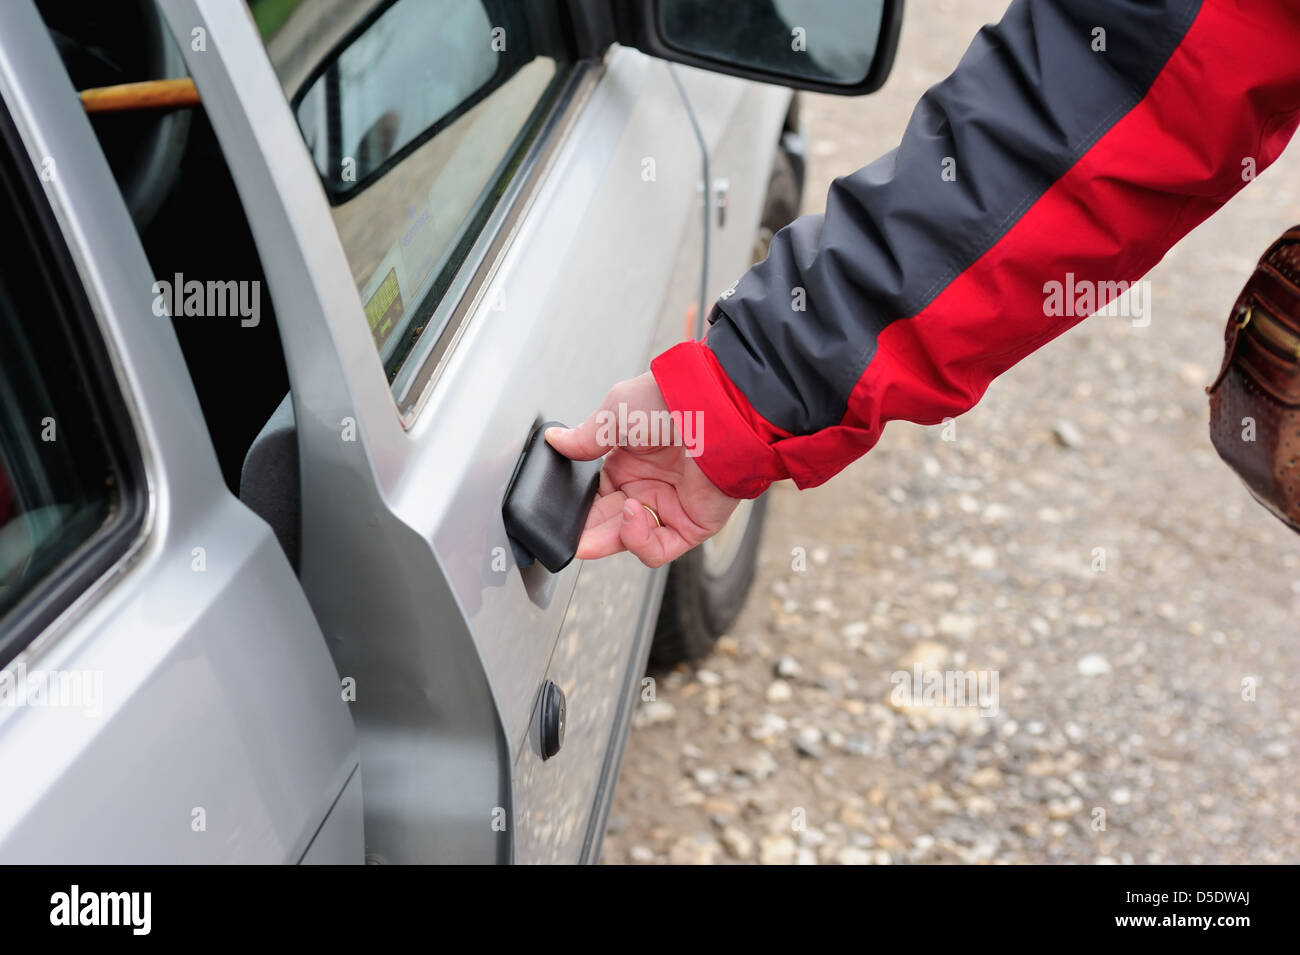 A womans hand opening shutting a car door (model released) Stock Photo